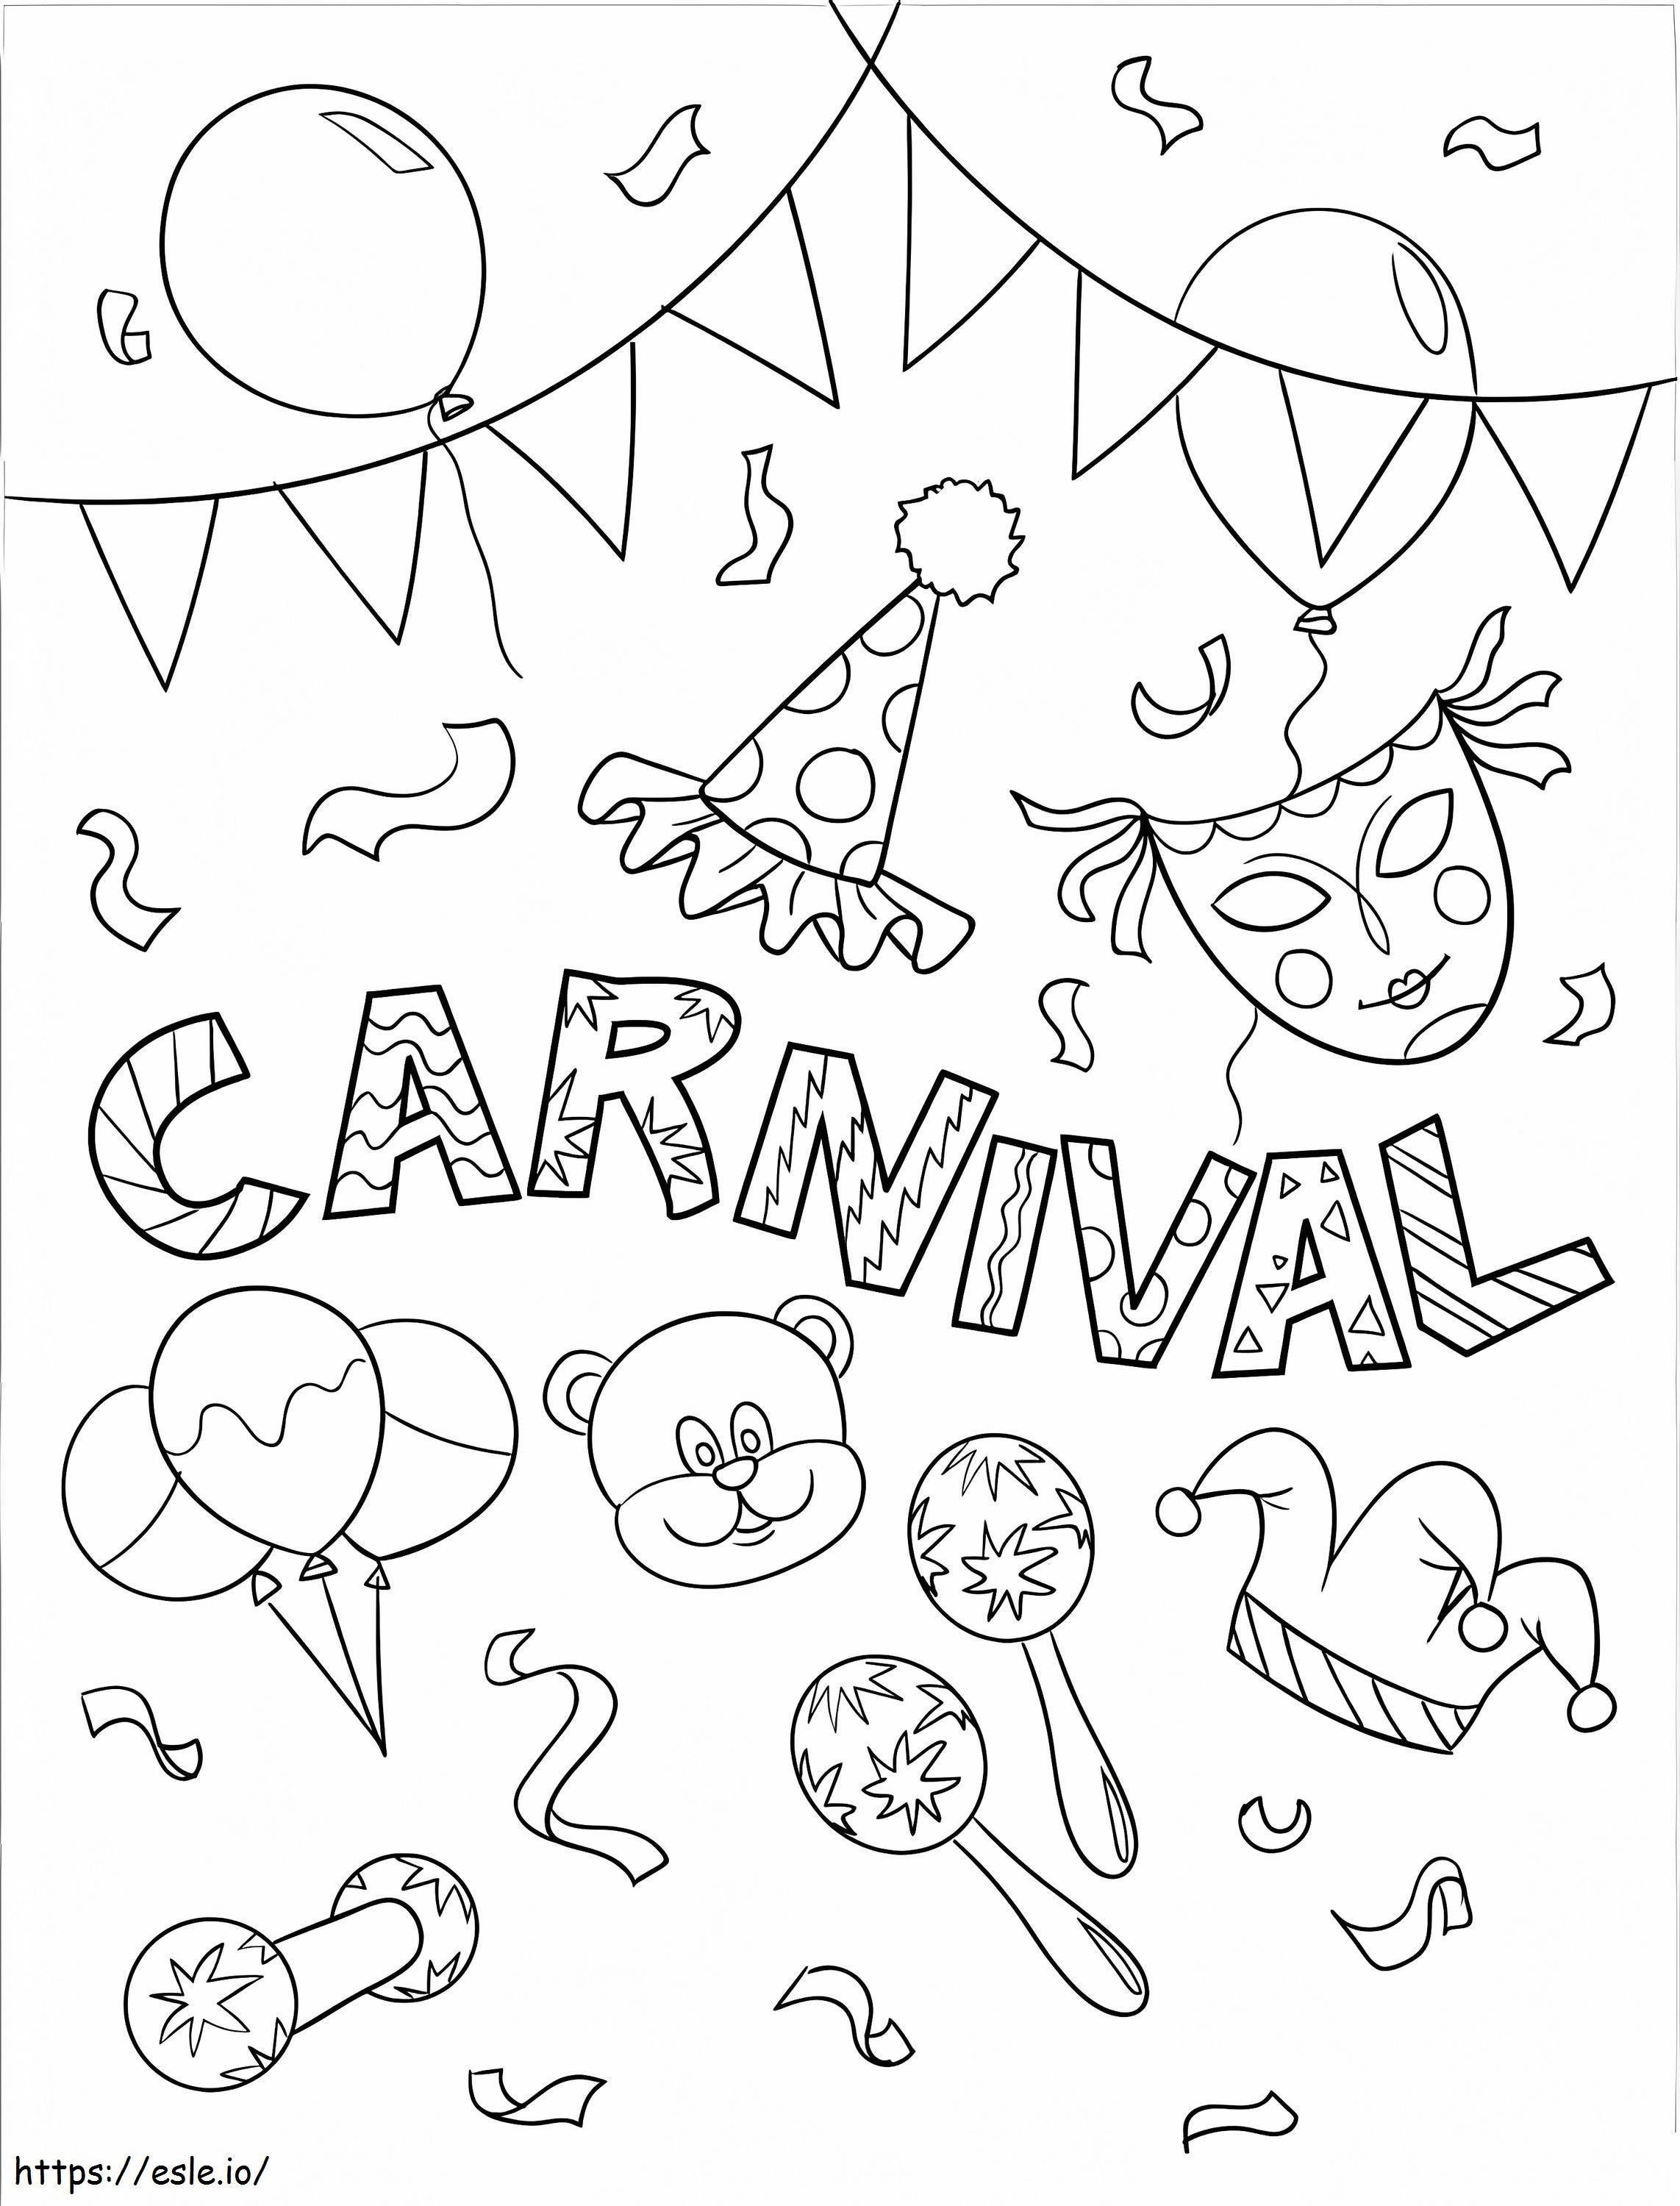 Printable Carnival coloring page